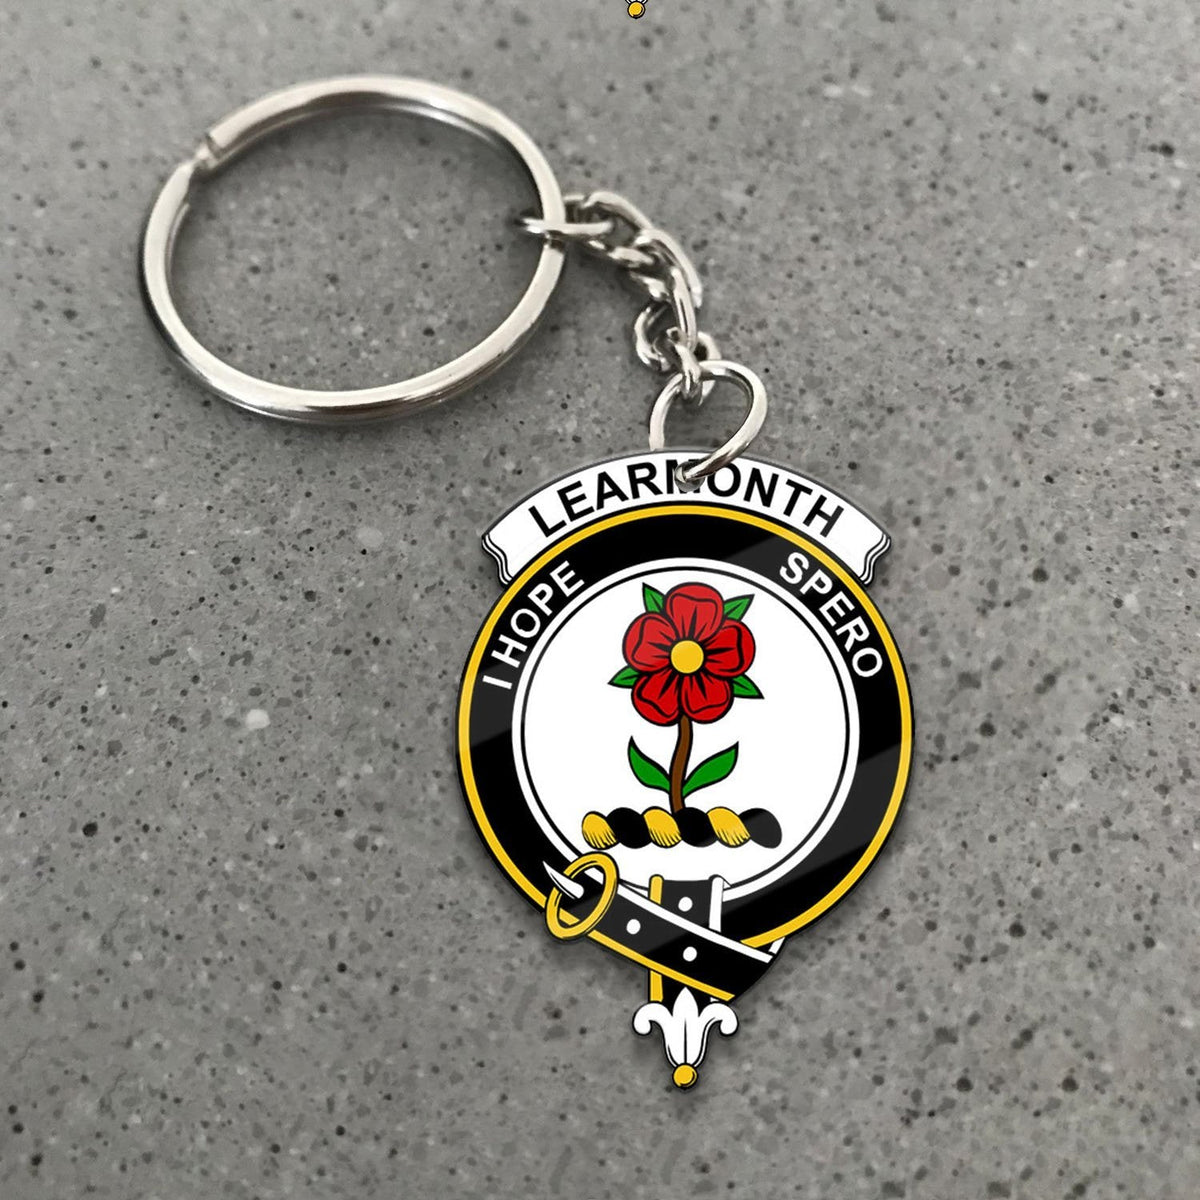 Learmonth Crest Keychain